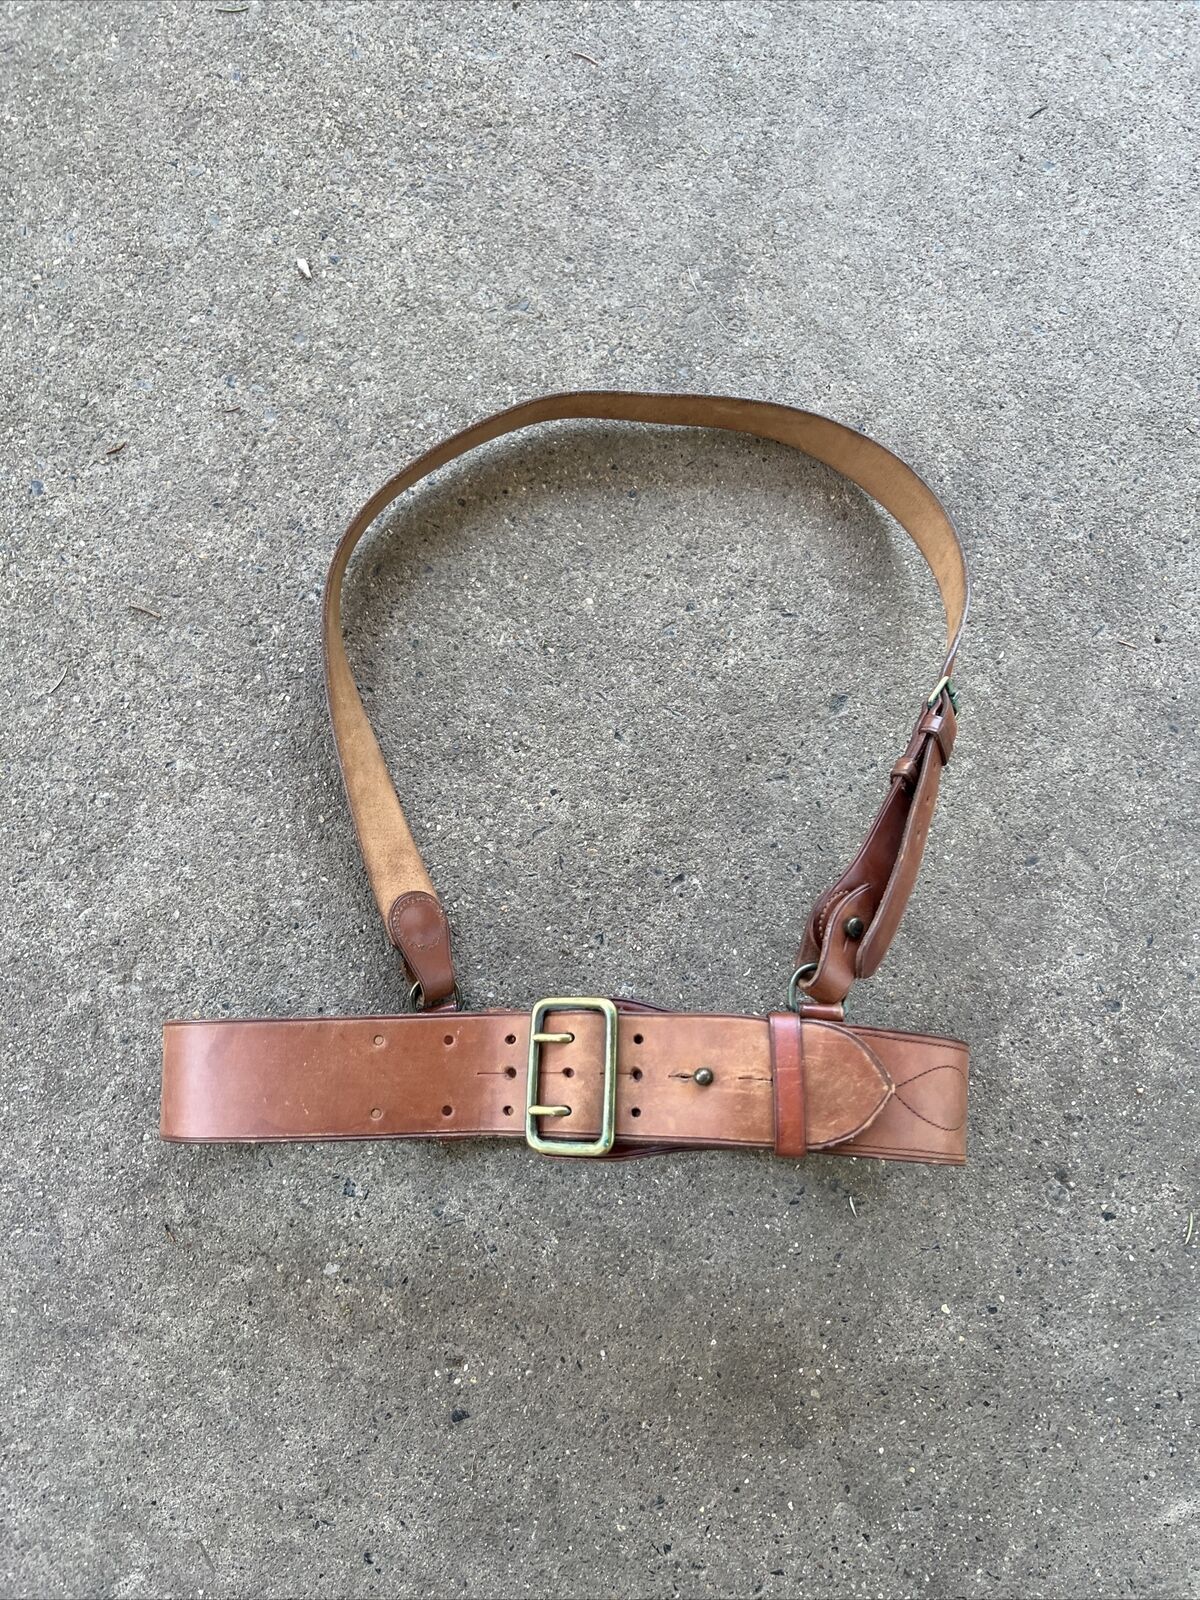 WW1 US Sam Brown Belt With Cross Strap Size 32 Named (R534